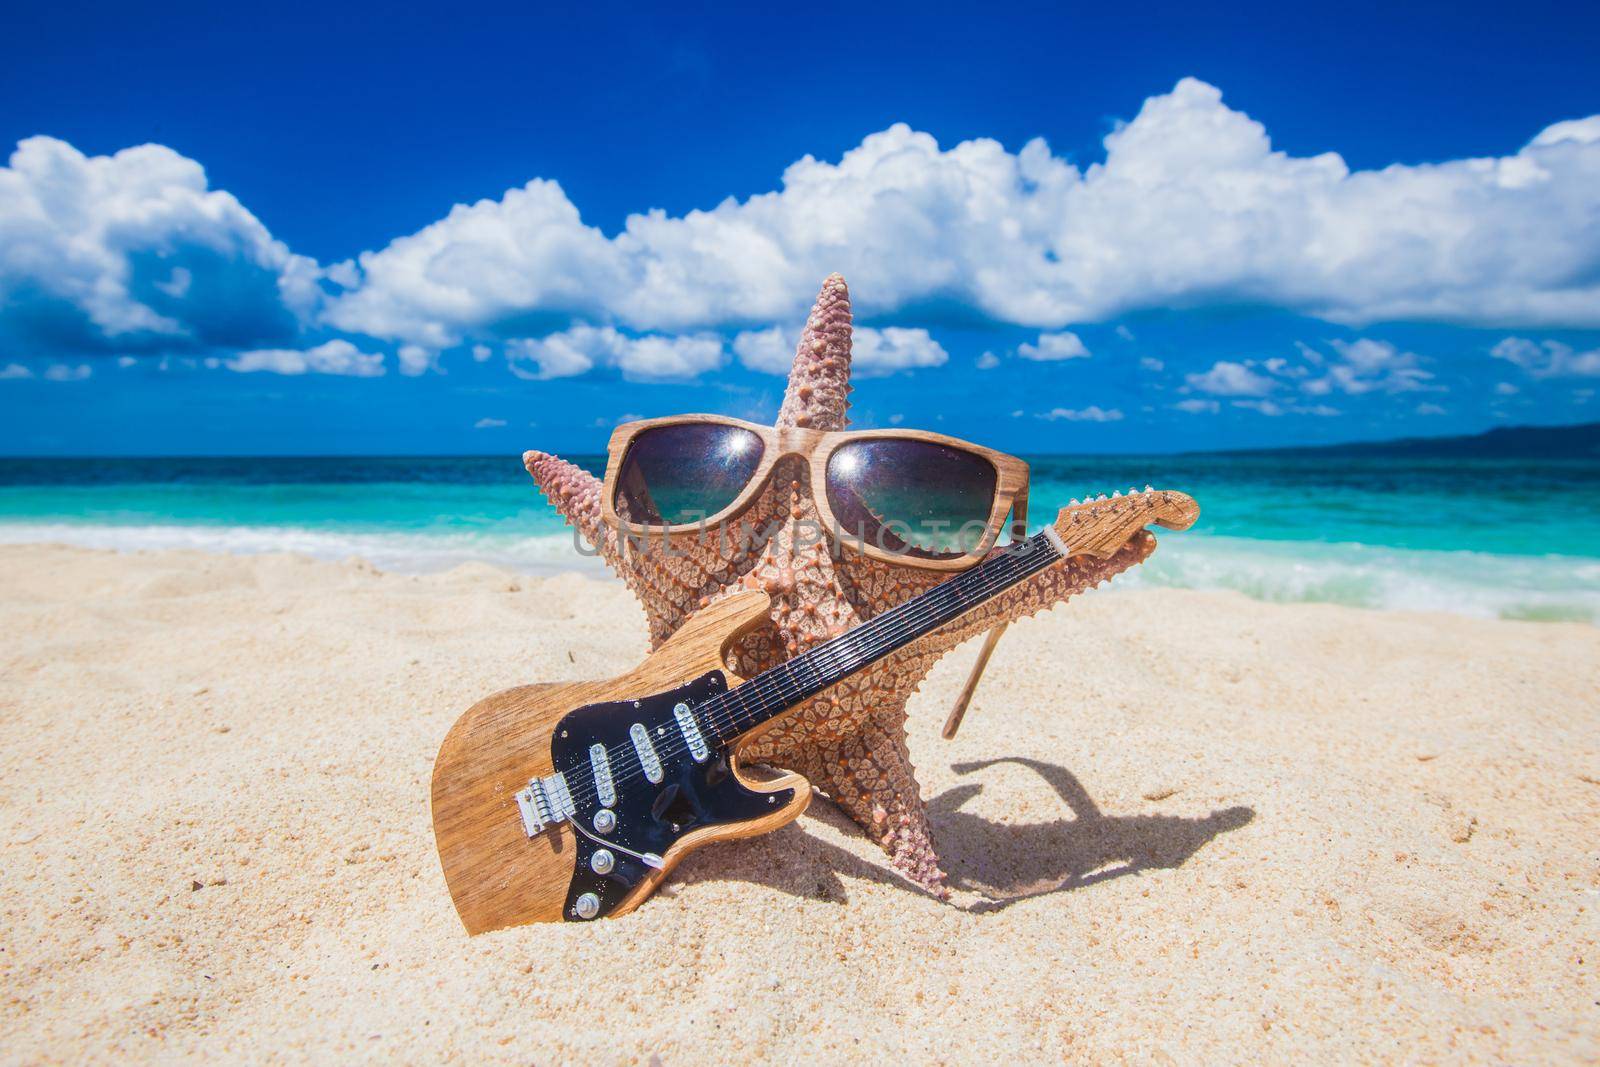 Starfish guitar player on sand of tropical beach at Philippines